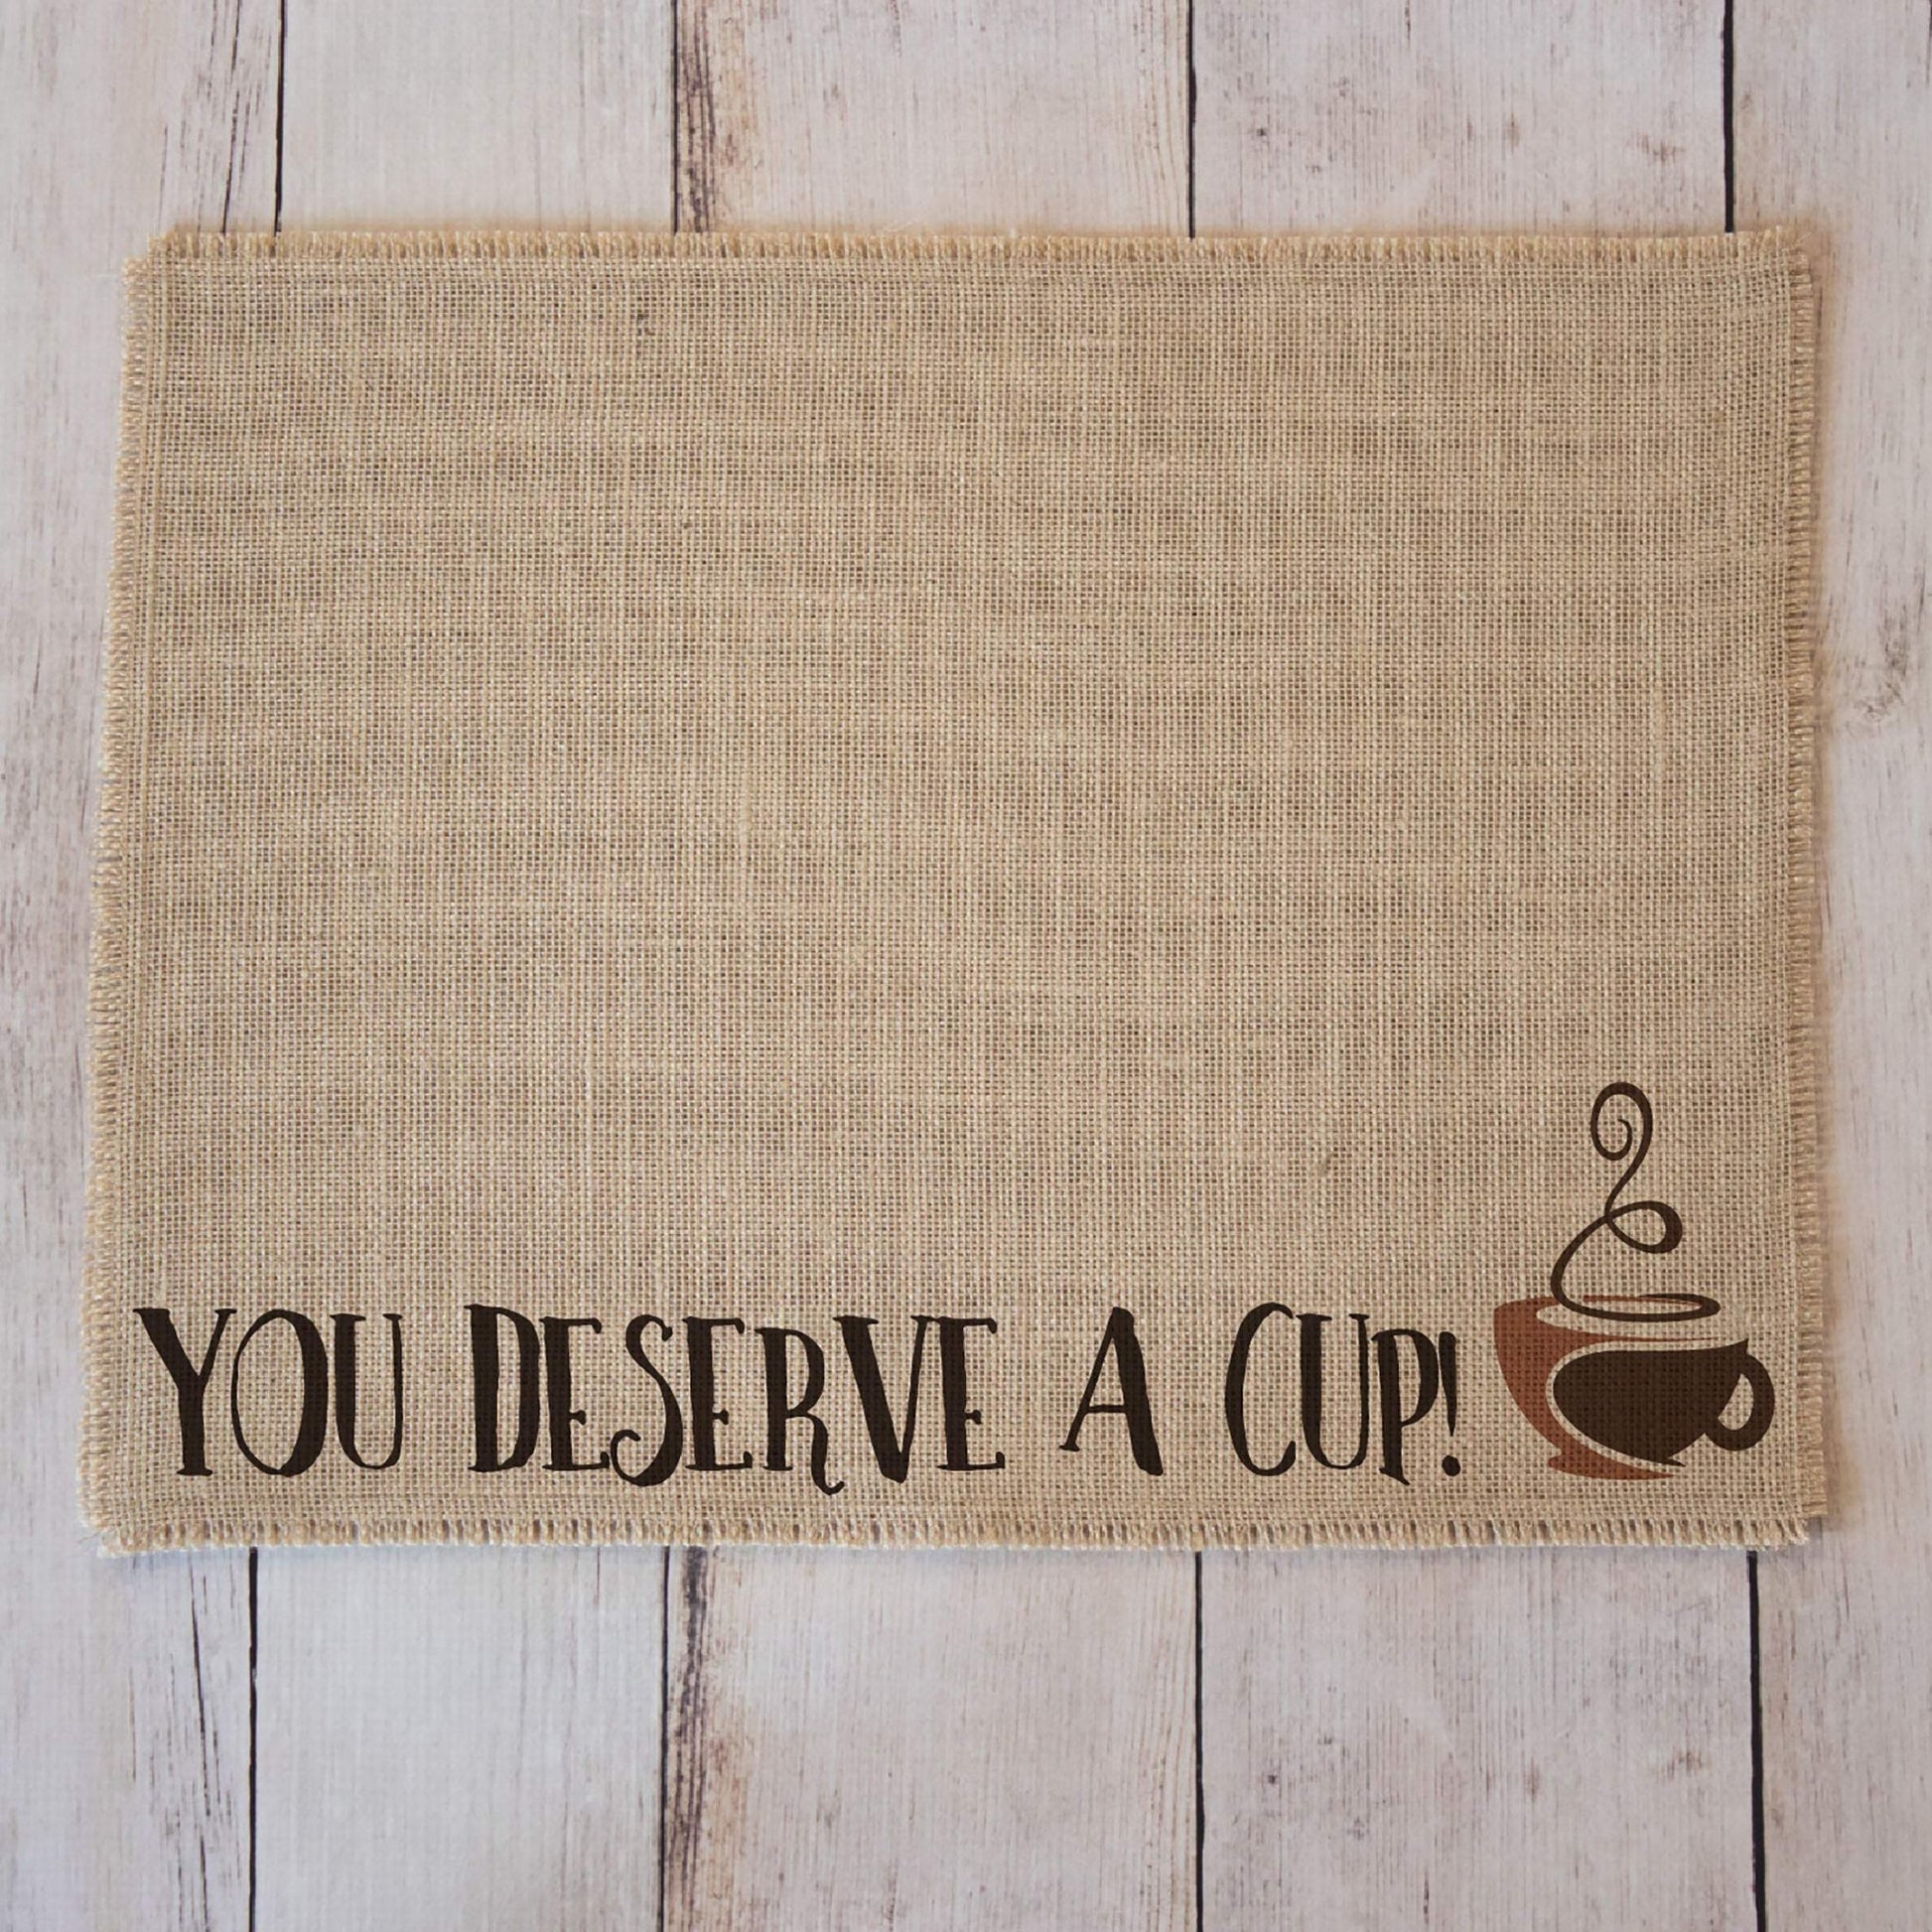 You deserve a cup! - burlap coffee maker placemat or coffee bar decor